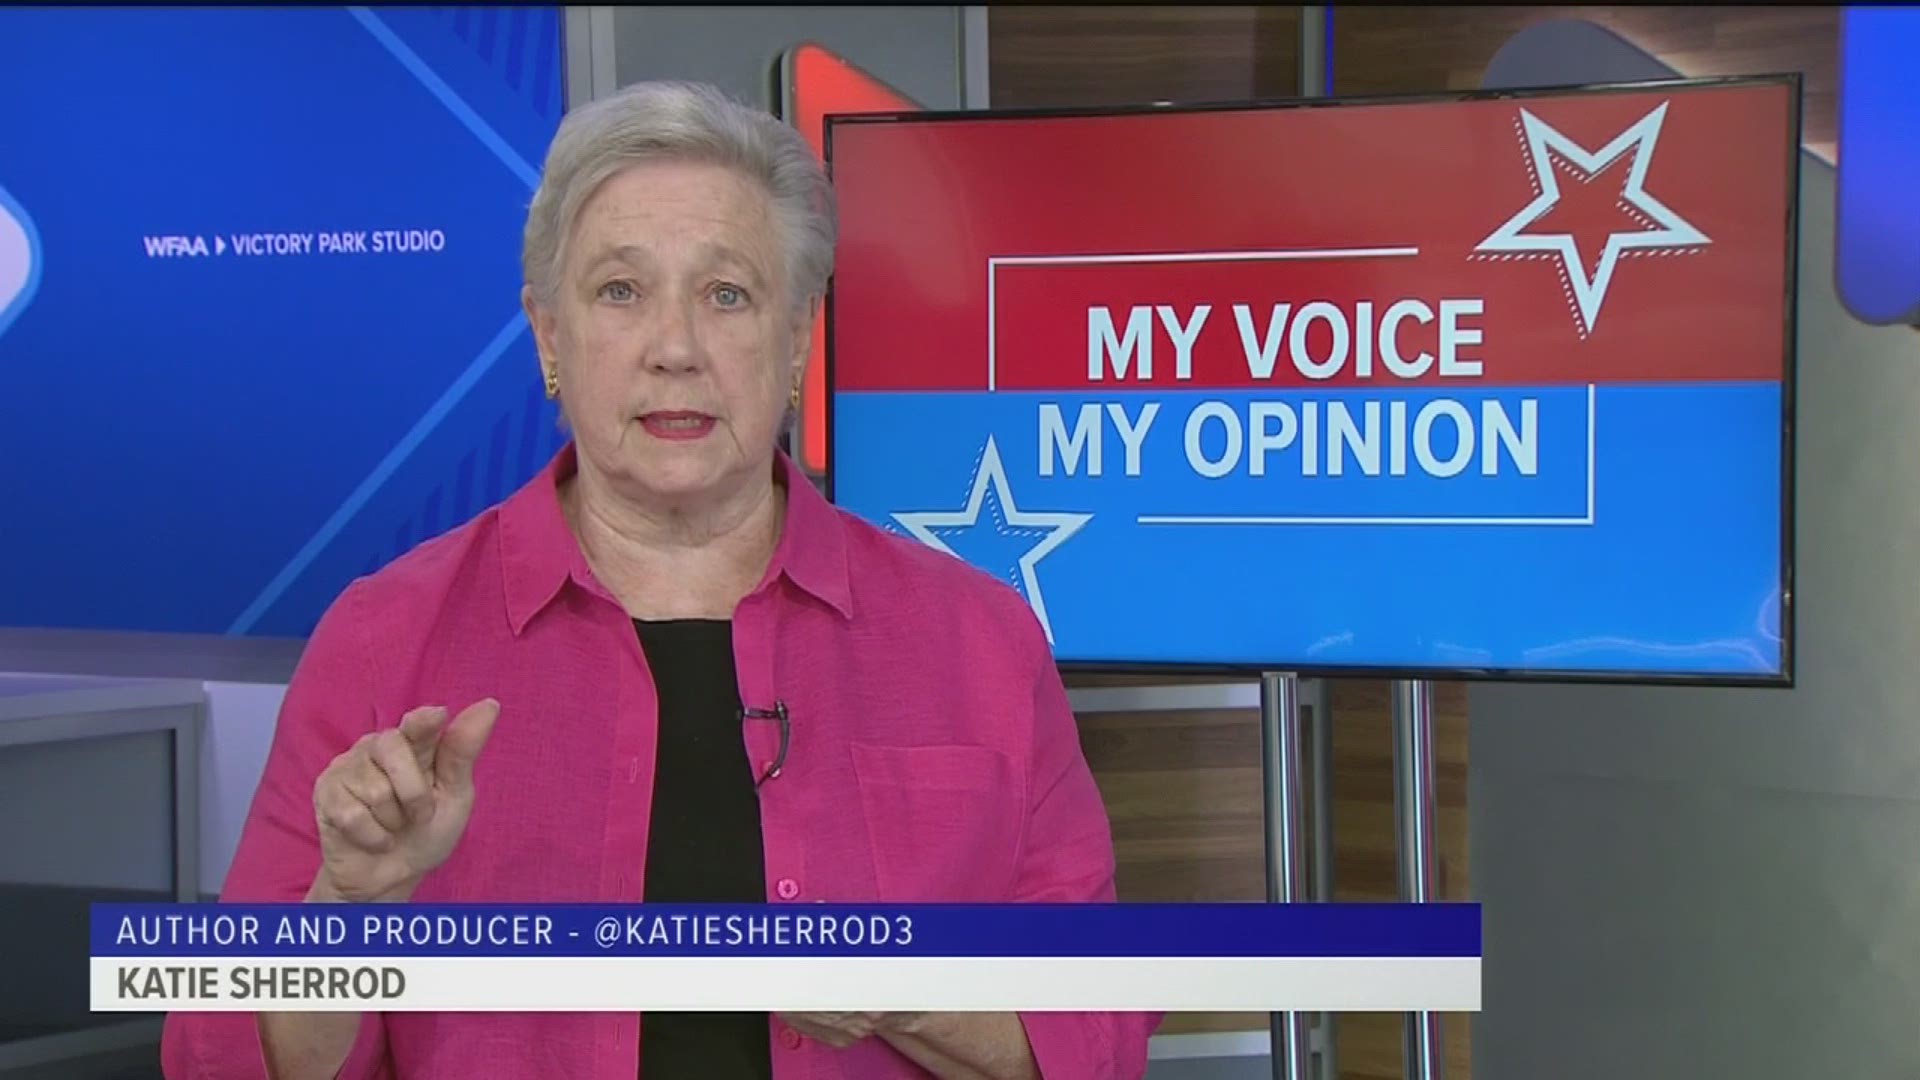 Gov. Greg Abbott has signed a lot of bills into law over the last week. However, there is one in particular that bothers author and producer Katie Sherrod. She explains why she’s disturbed in this week’s My Voice, My Opinion.